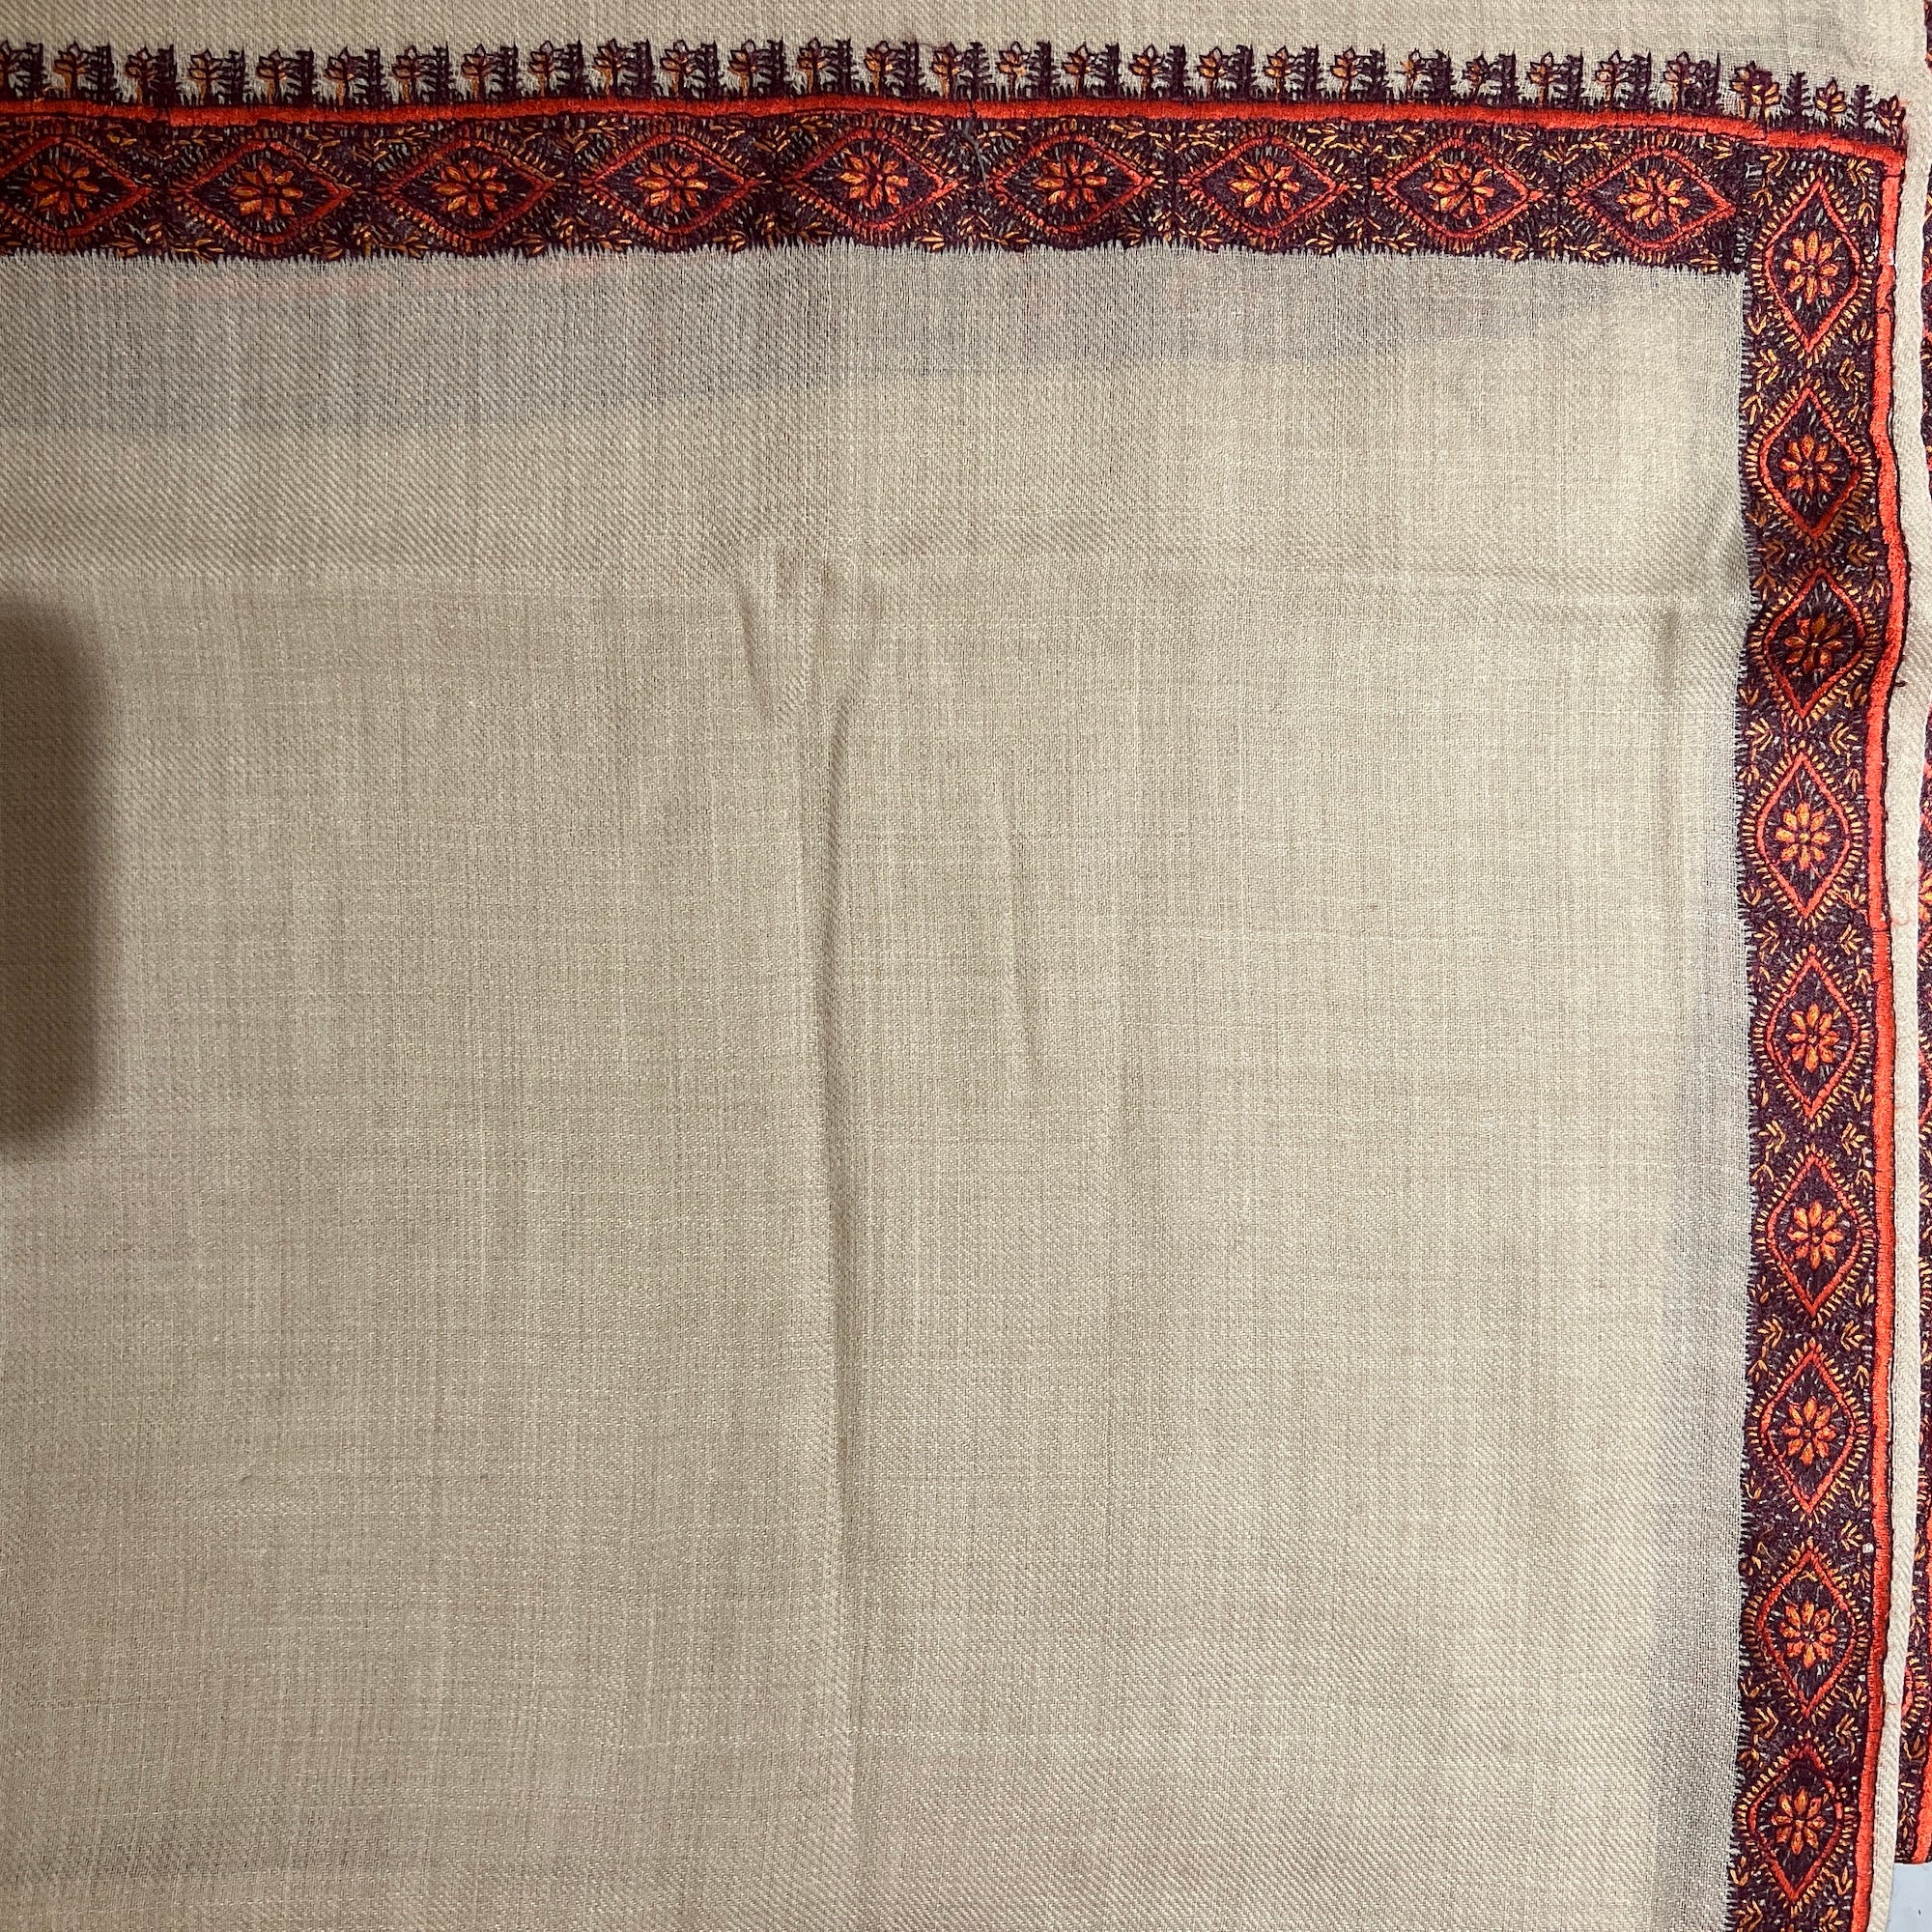 AM Mens Embroidered Woolen Shawls 2 Colors - Vintage India NYC